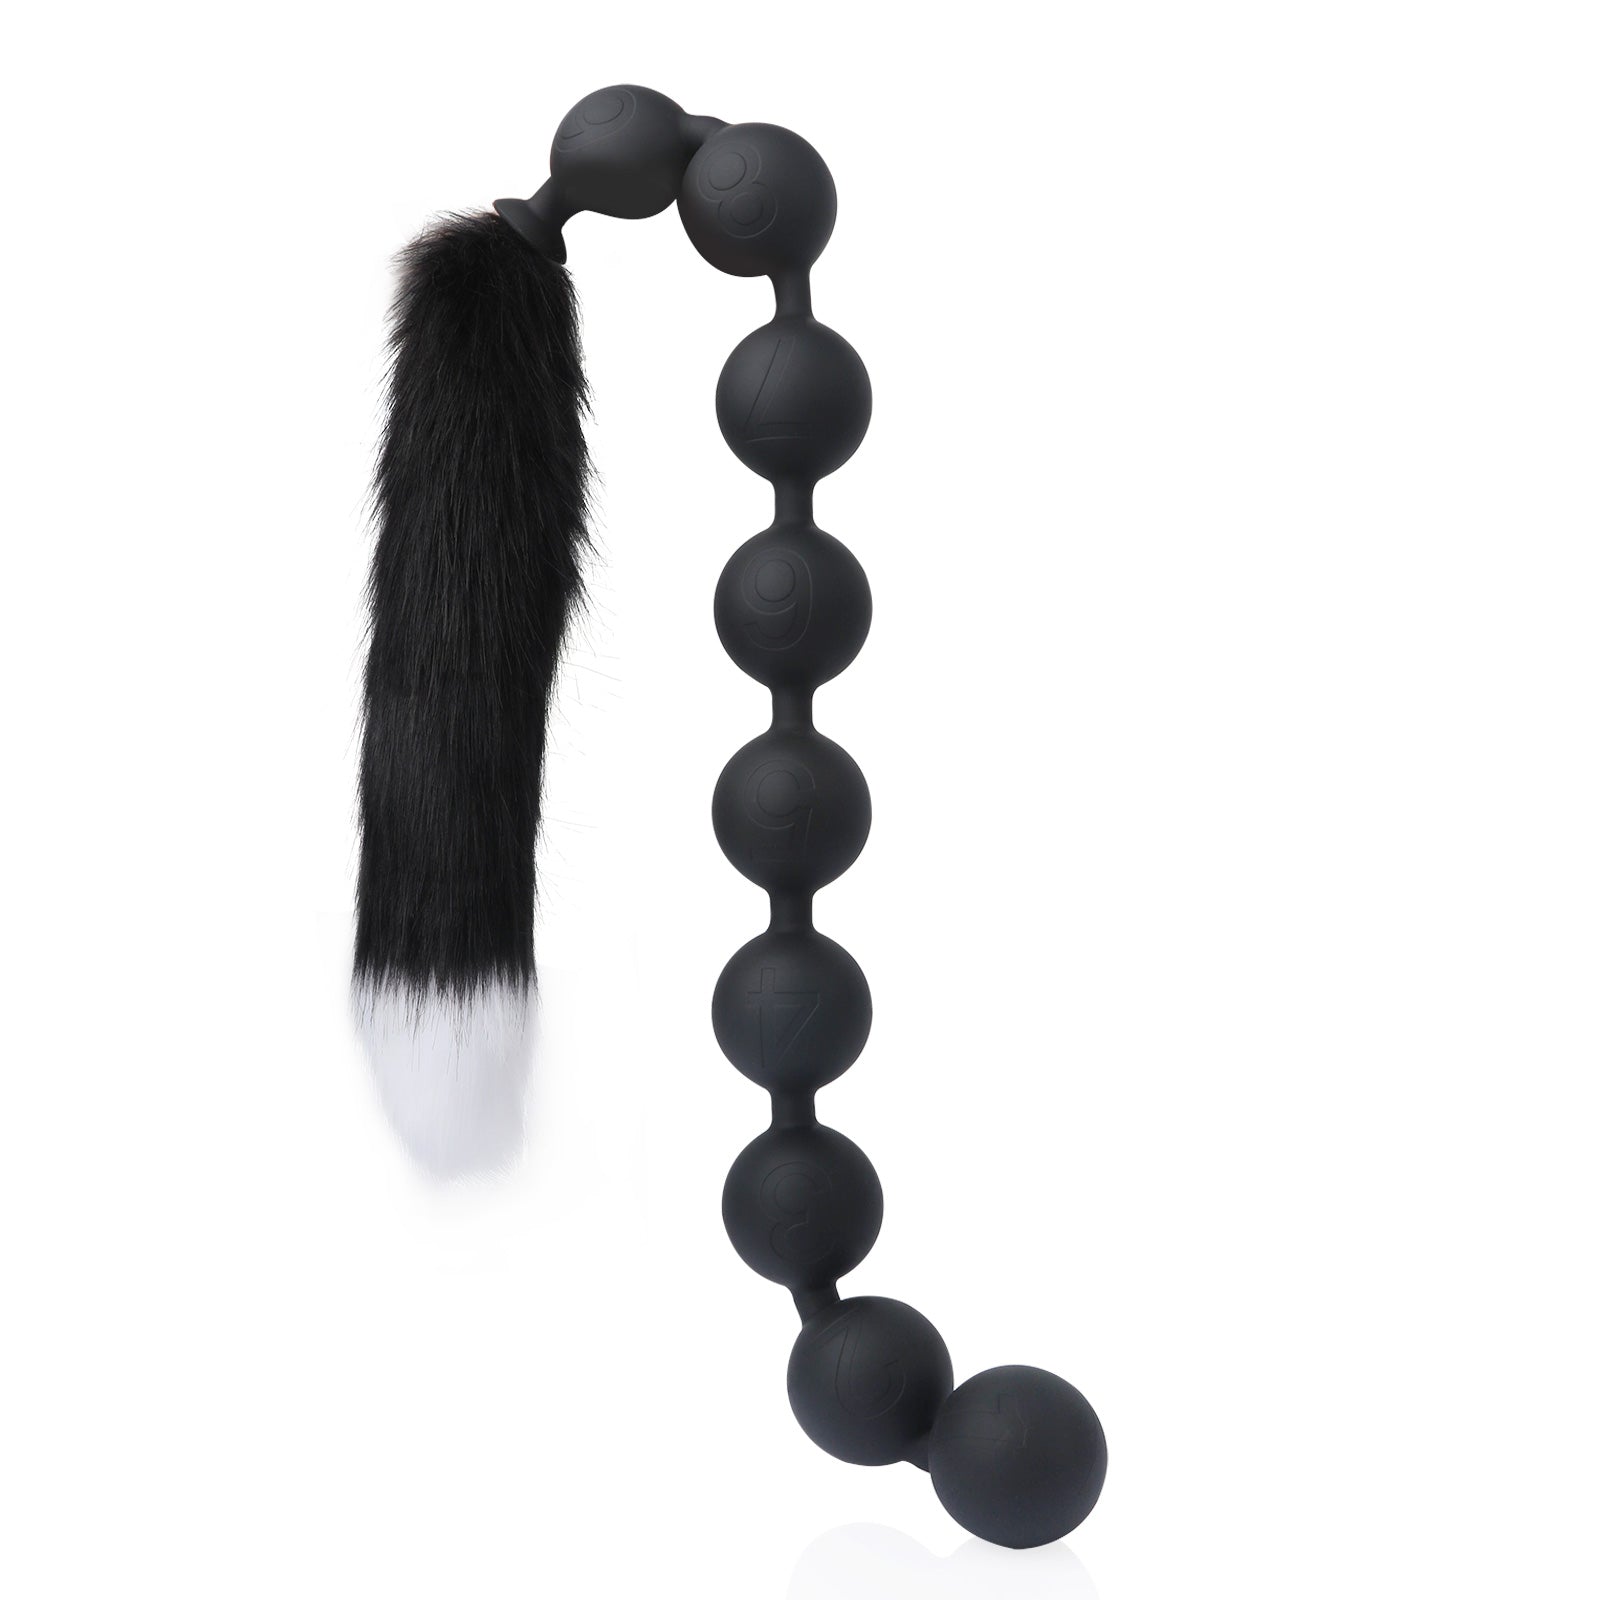 Different Size Anal Beads - 9 Bead Design with Tail - Comfortable Anal â€“  Juliet & Martin's toy store